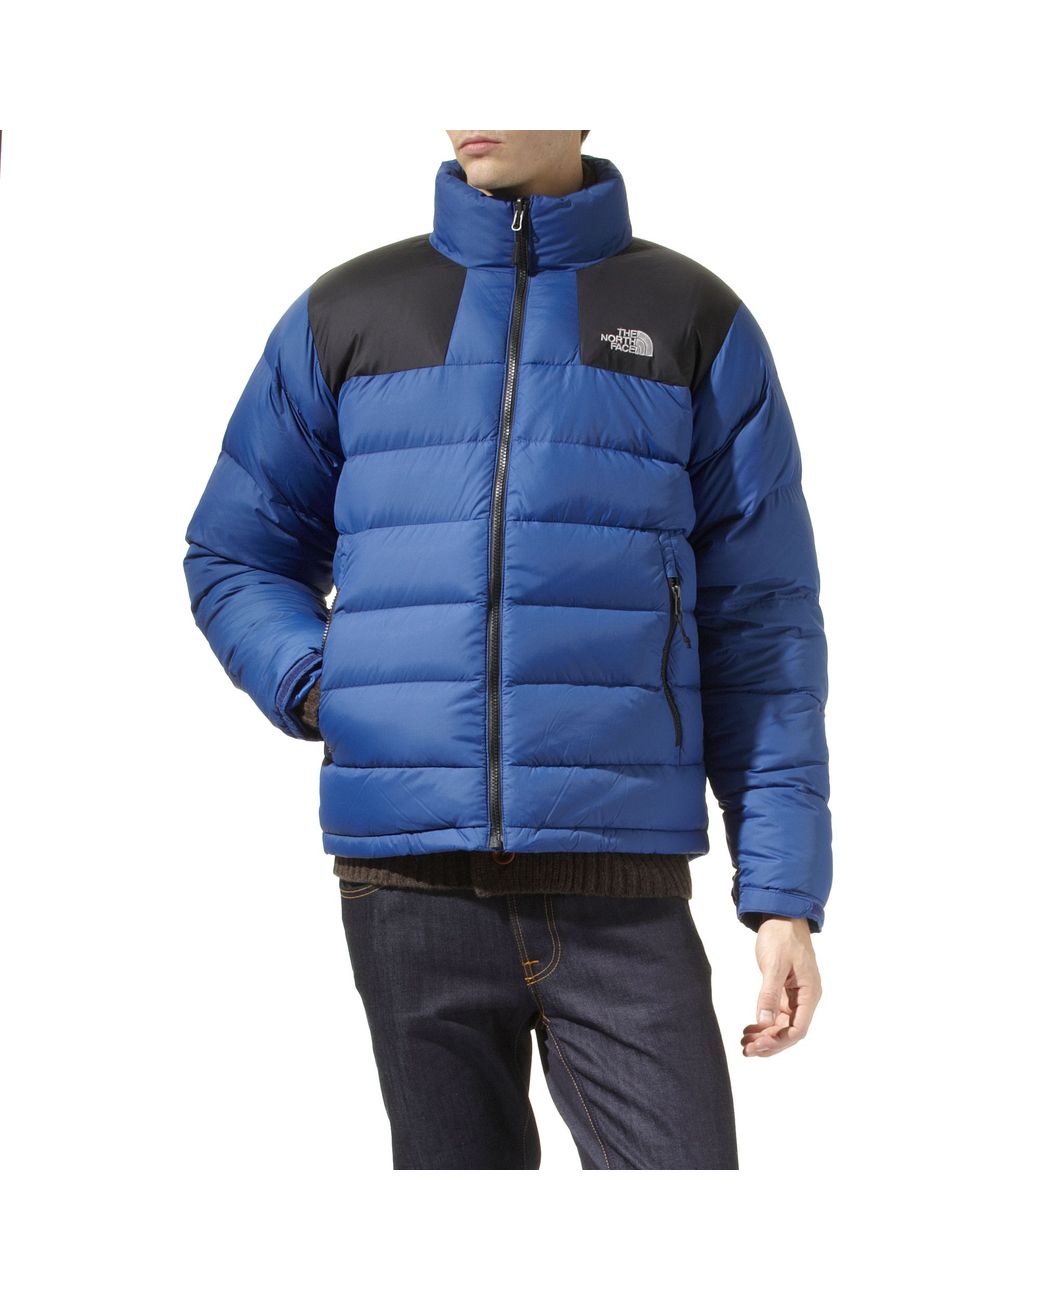 massif jacket the north face